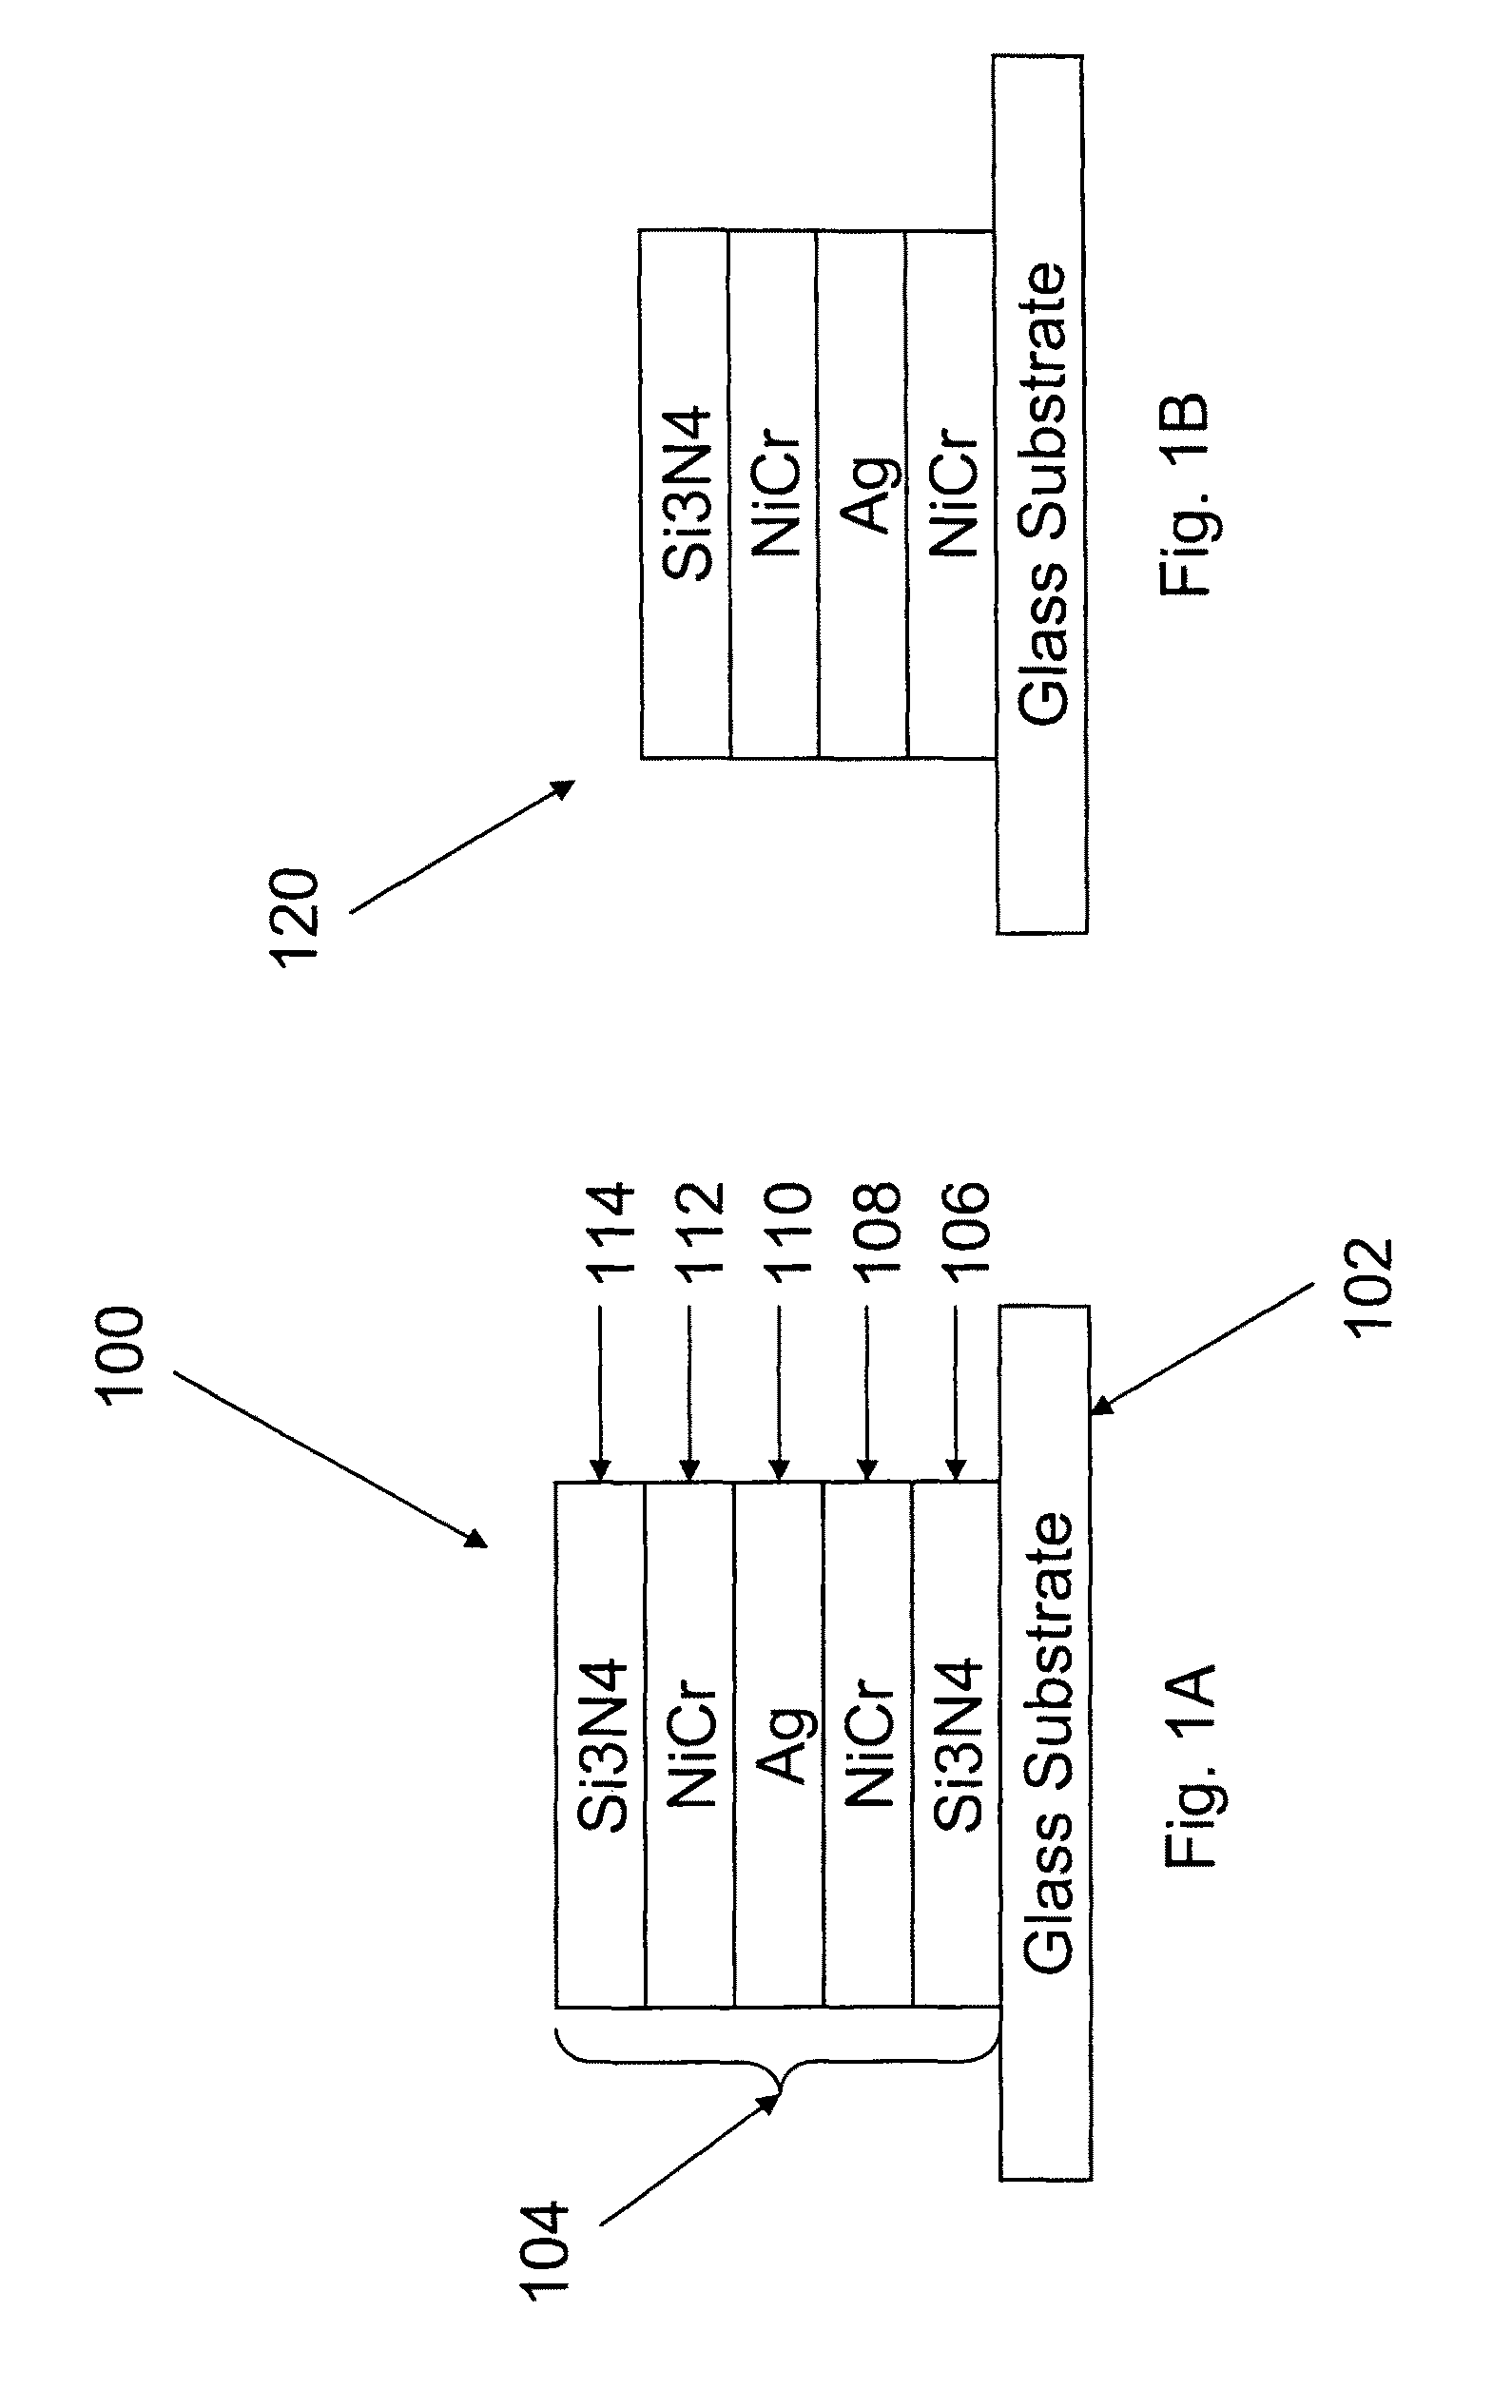 Coated articles with heat treatable coating for concentrated solar power applications, and/or methods of making the same